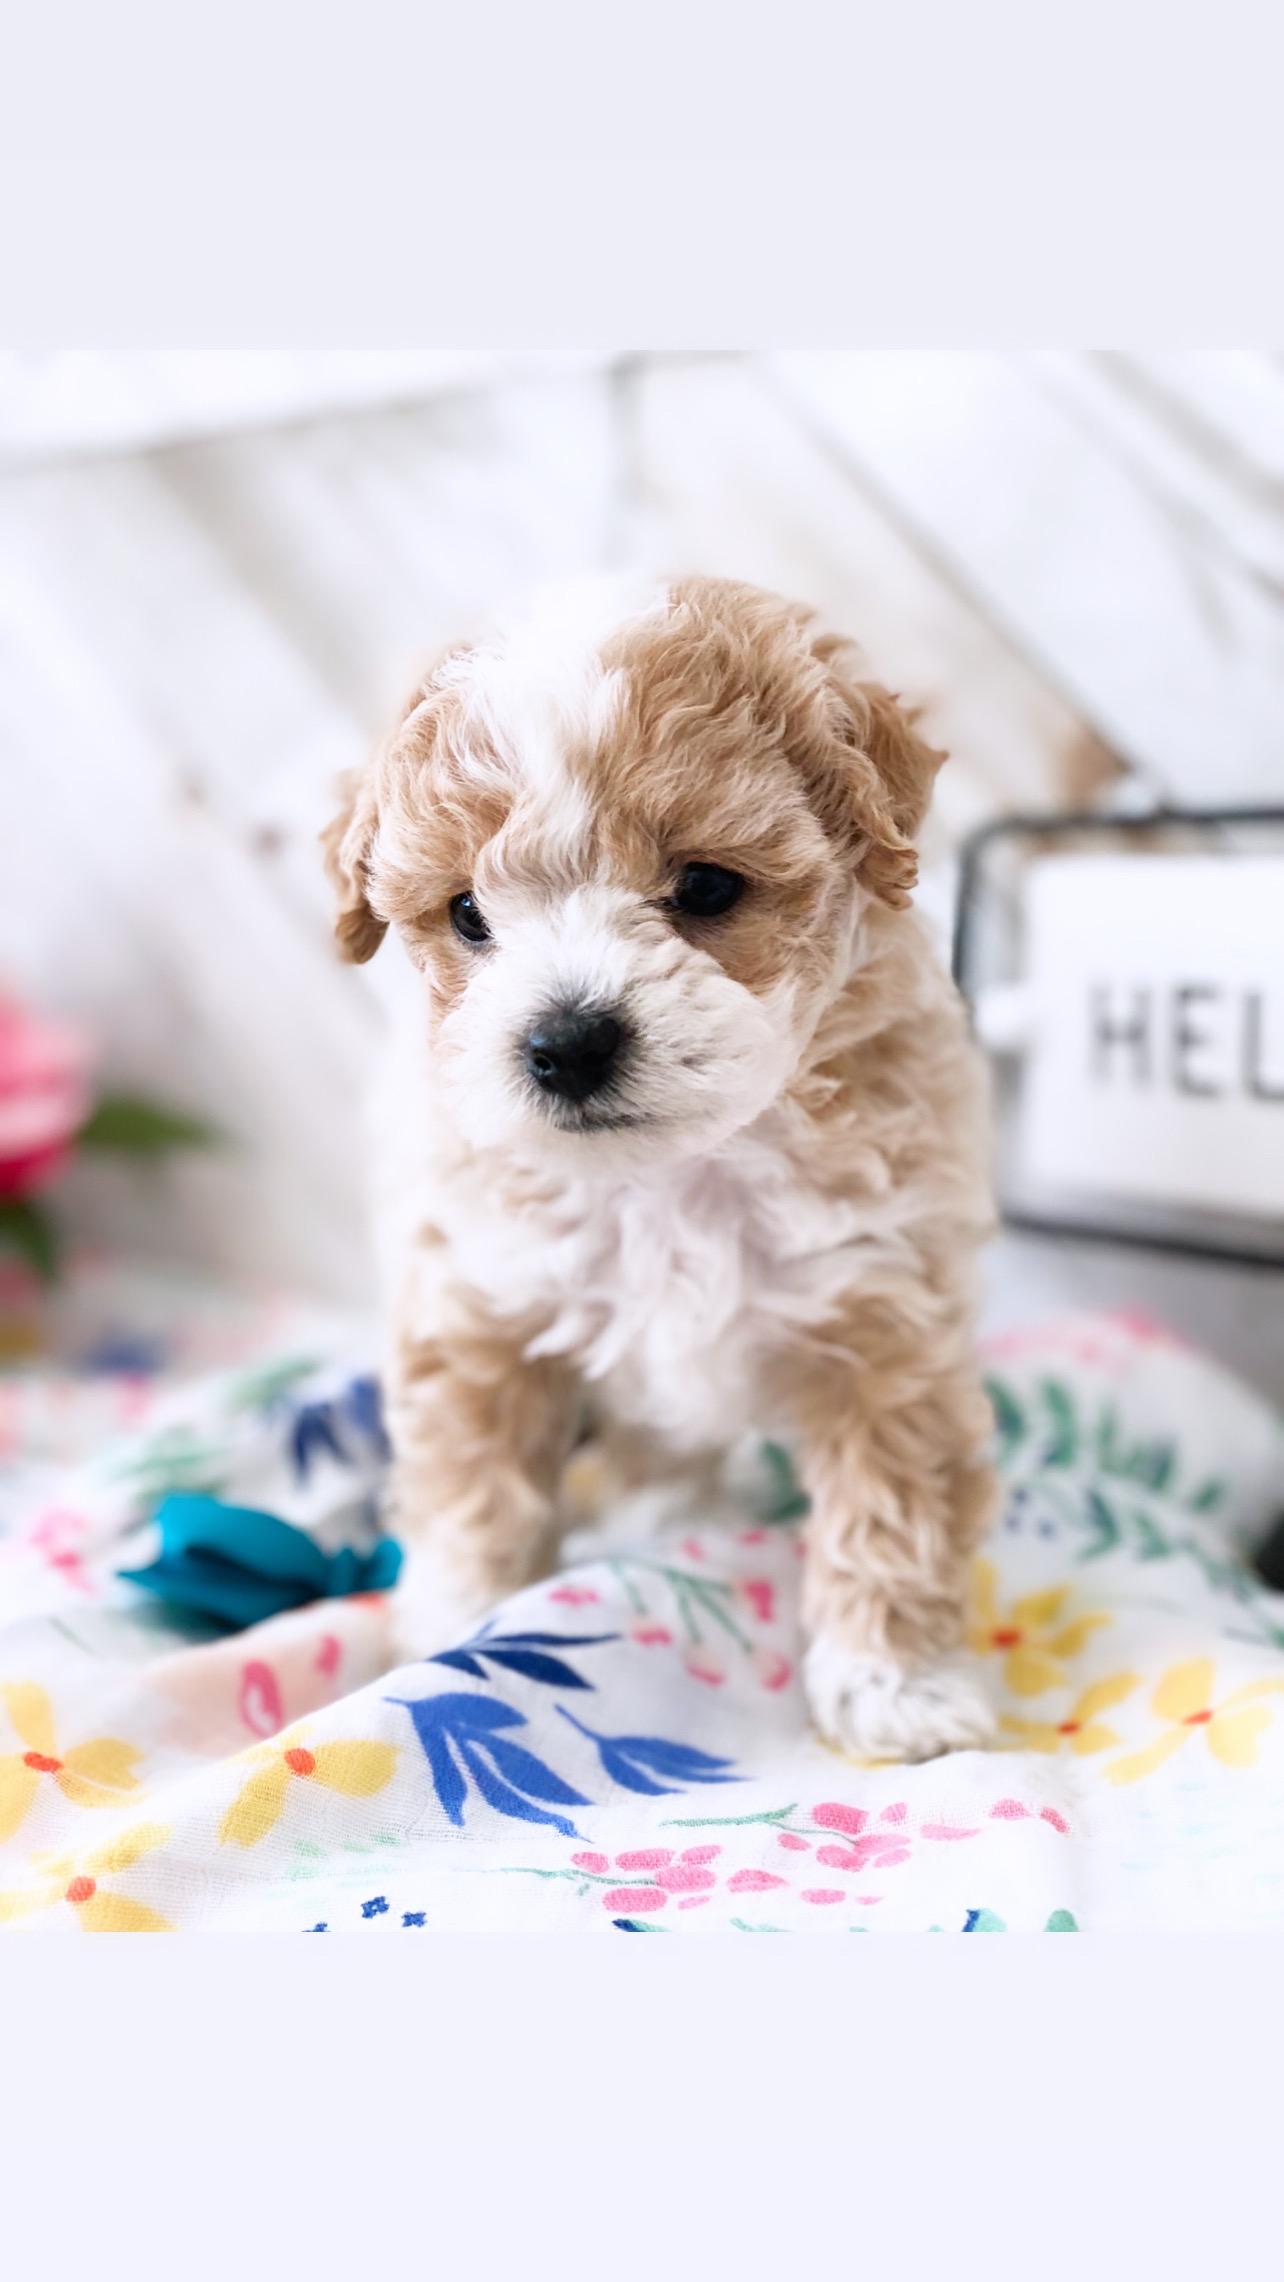 A small brown and white puppy stands on a vibrant, multicolored blanket.